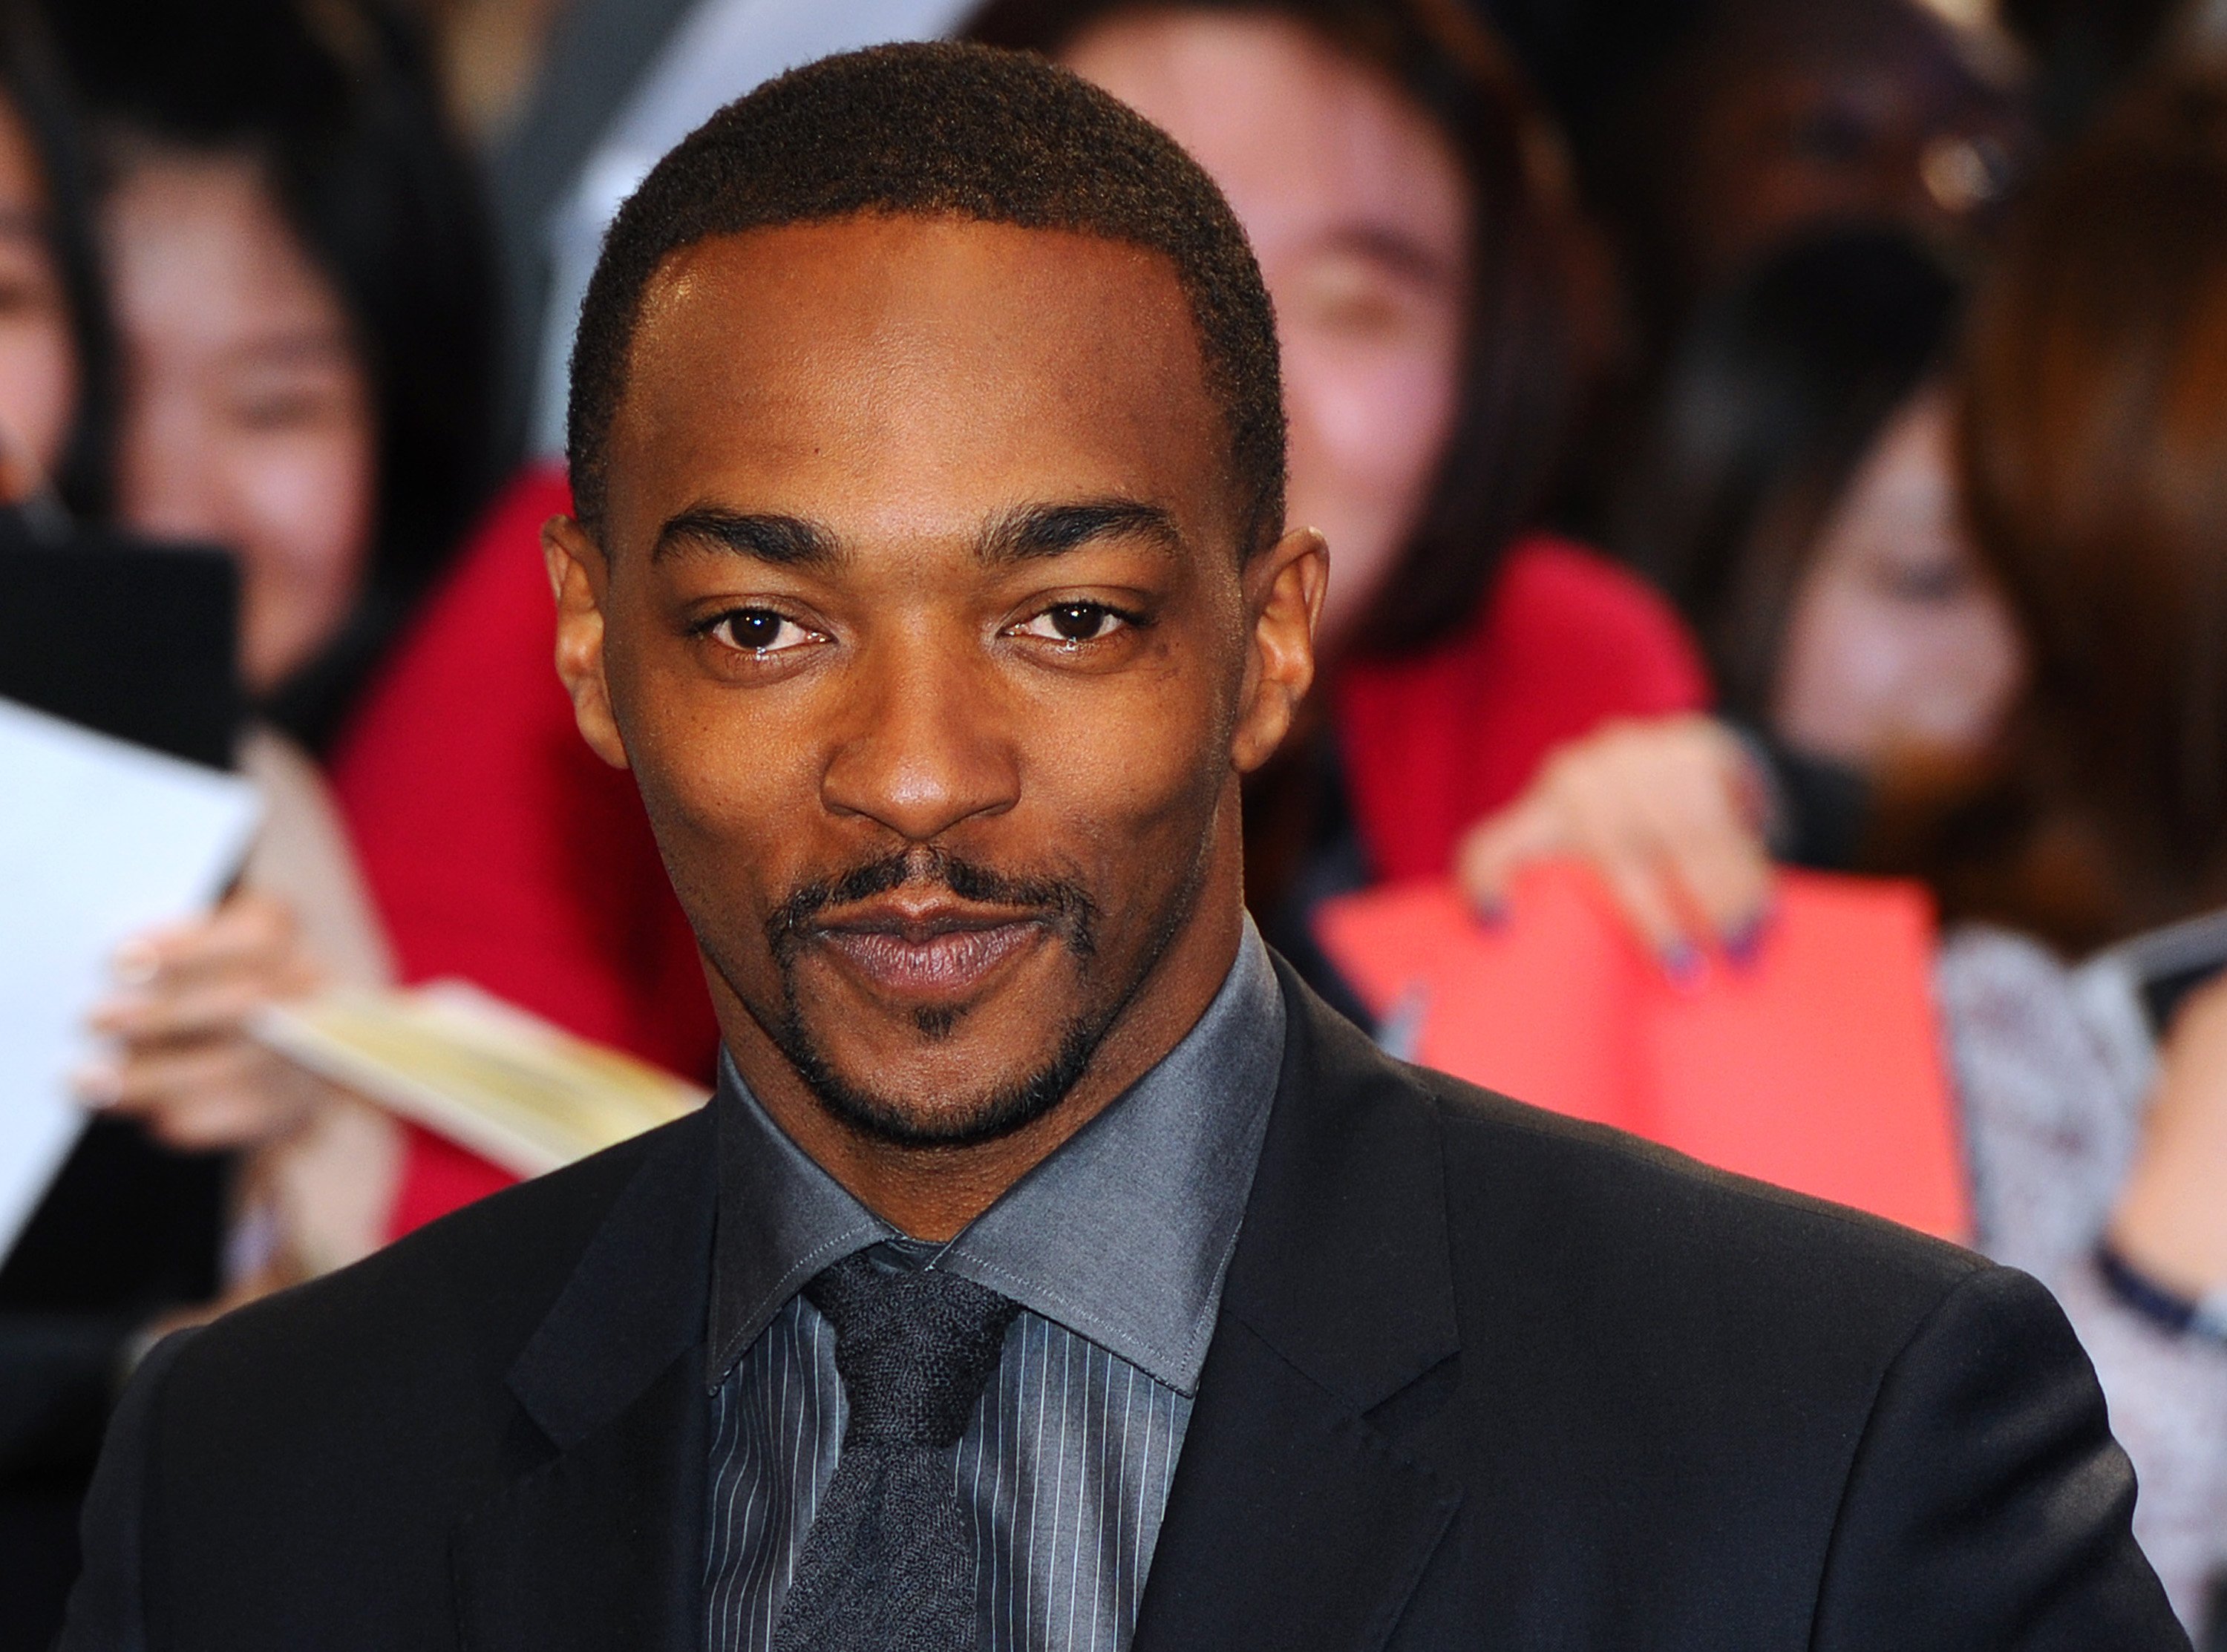 Anthony Mackie at the "Captain America: The Winter Soldier" premiere at Westfield London on March 20, 2014 in London, England. | Source: Getty Images